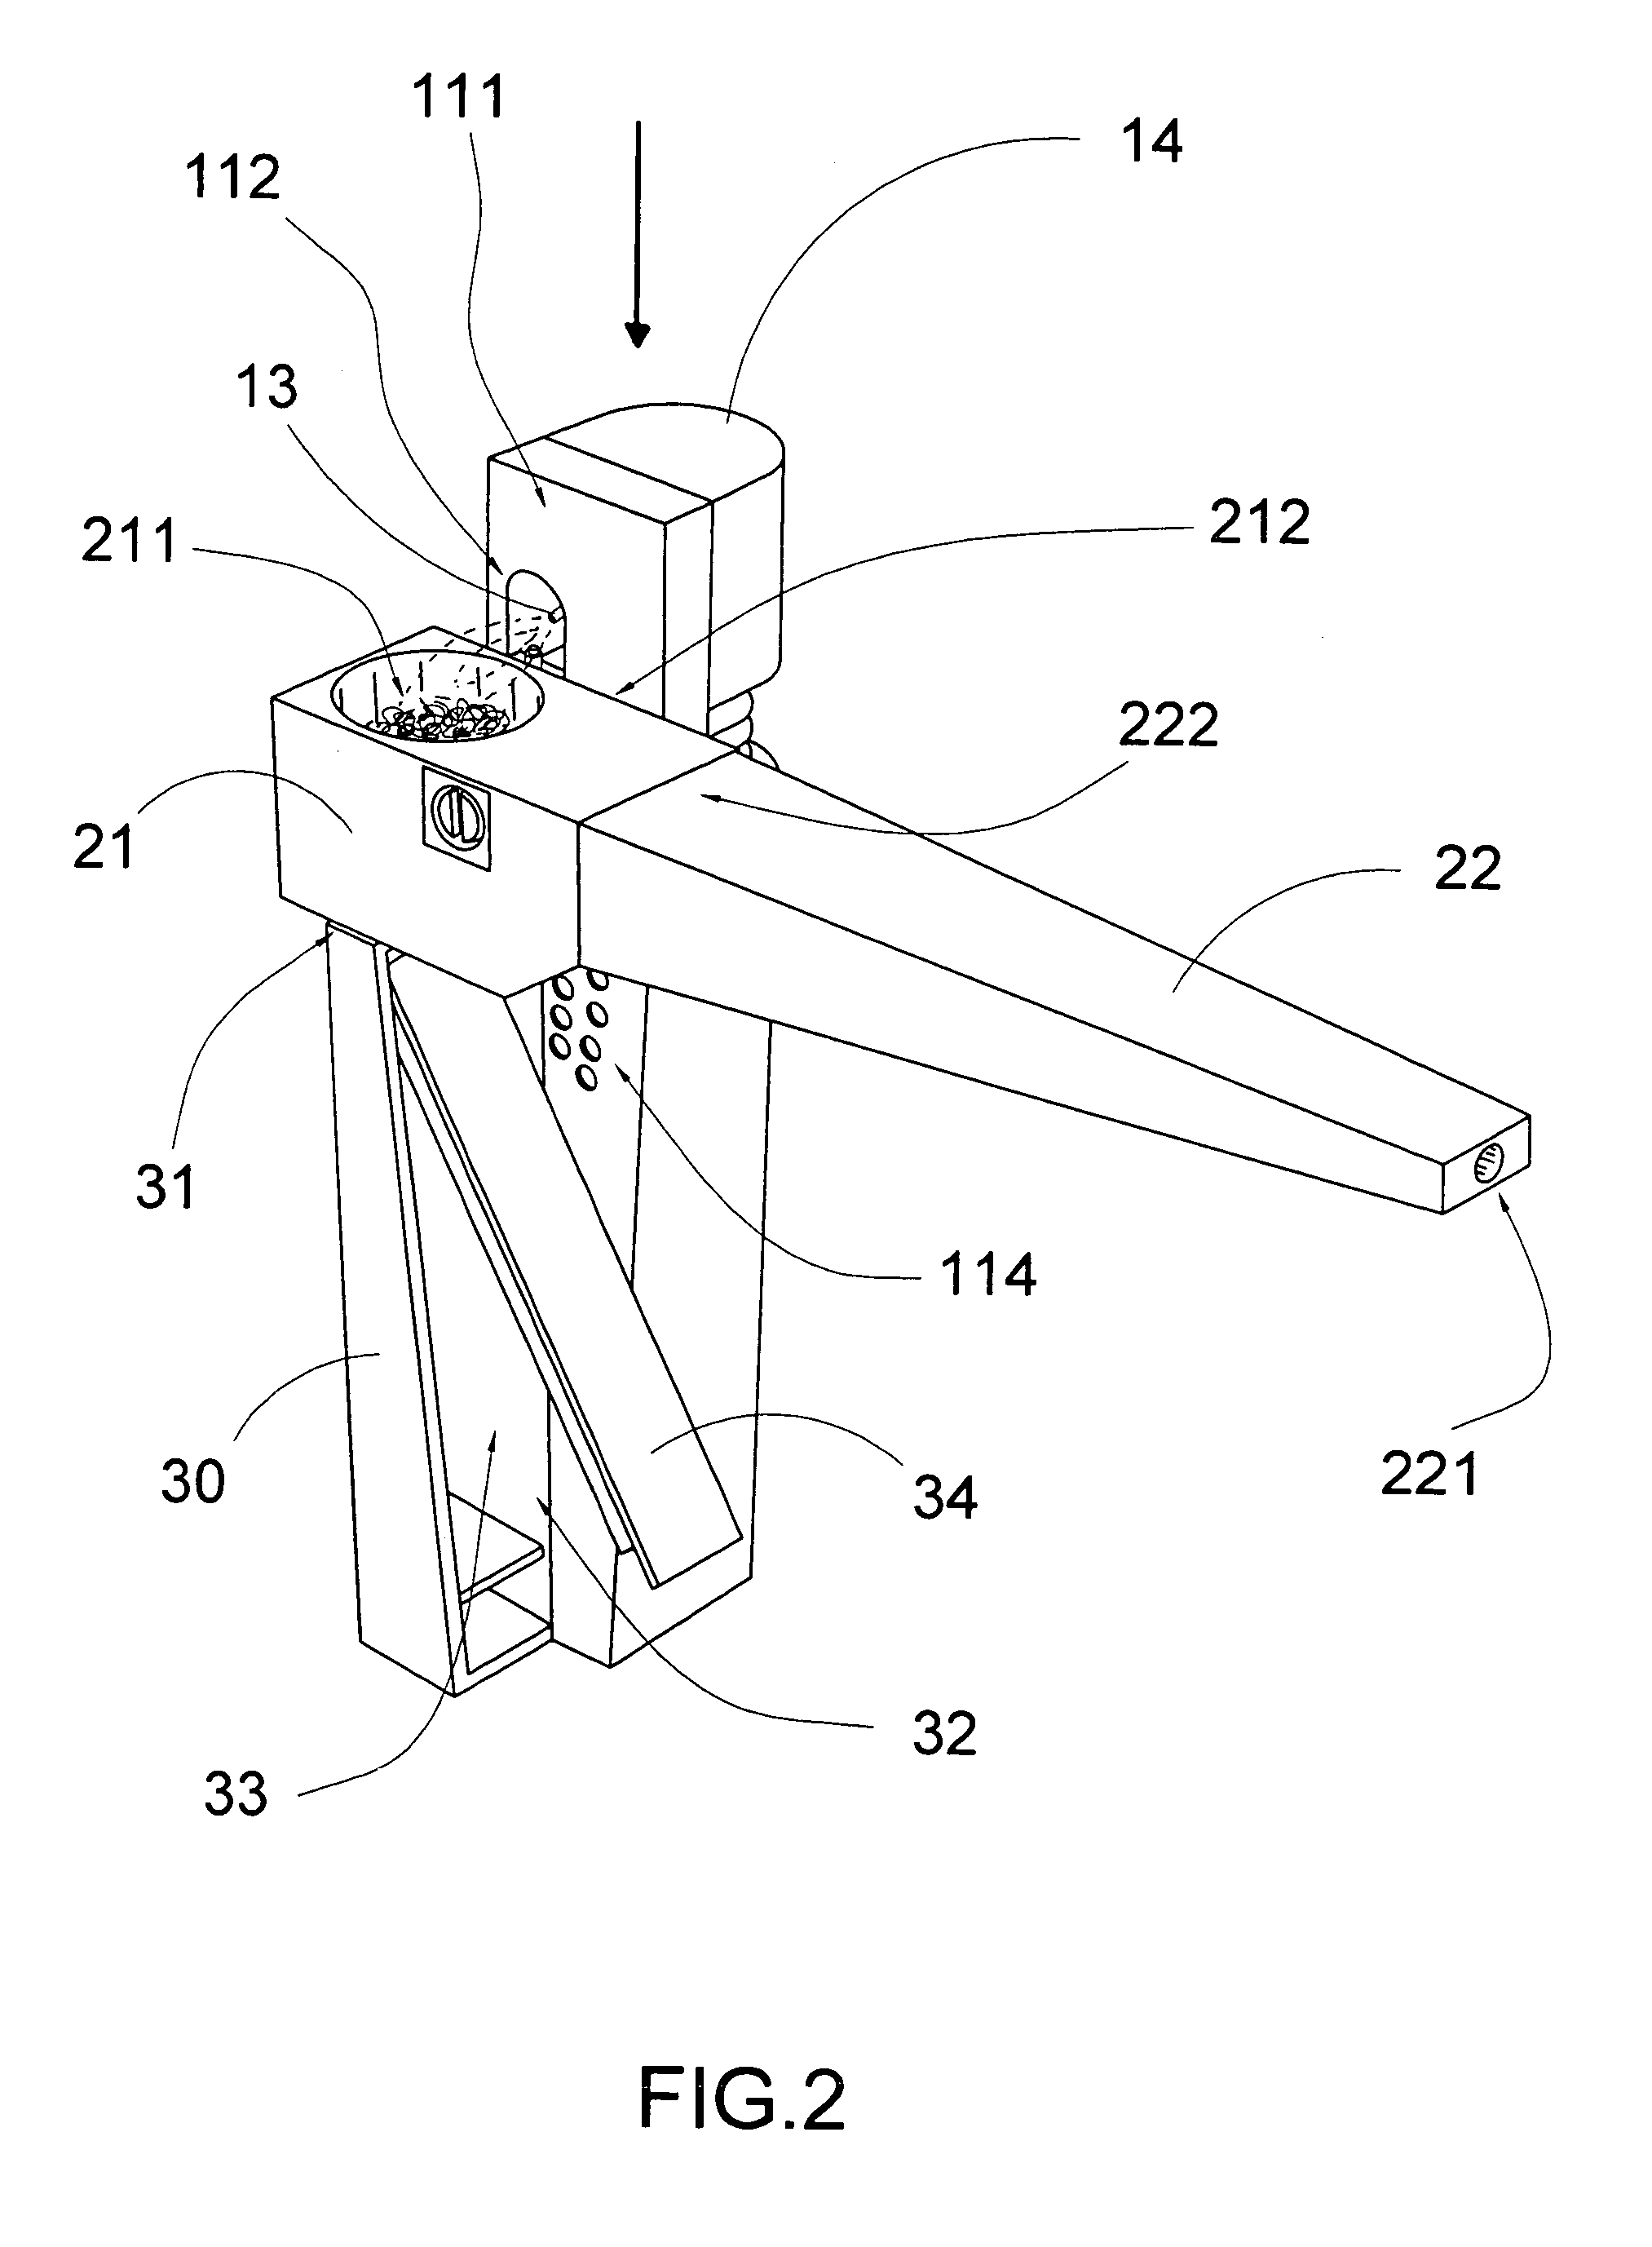 Combination smoking device and lighter